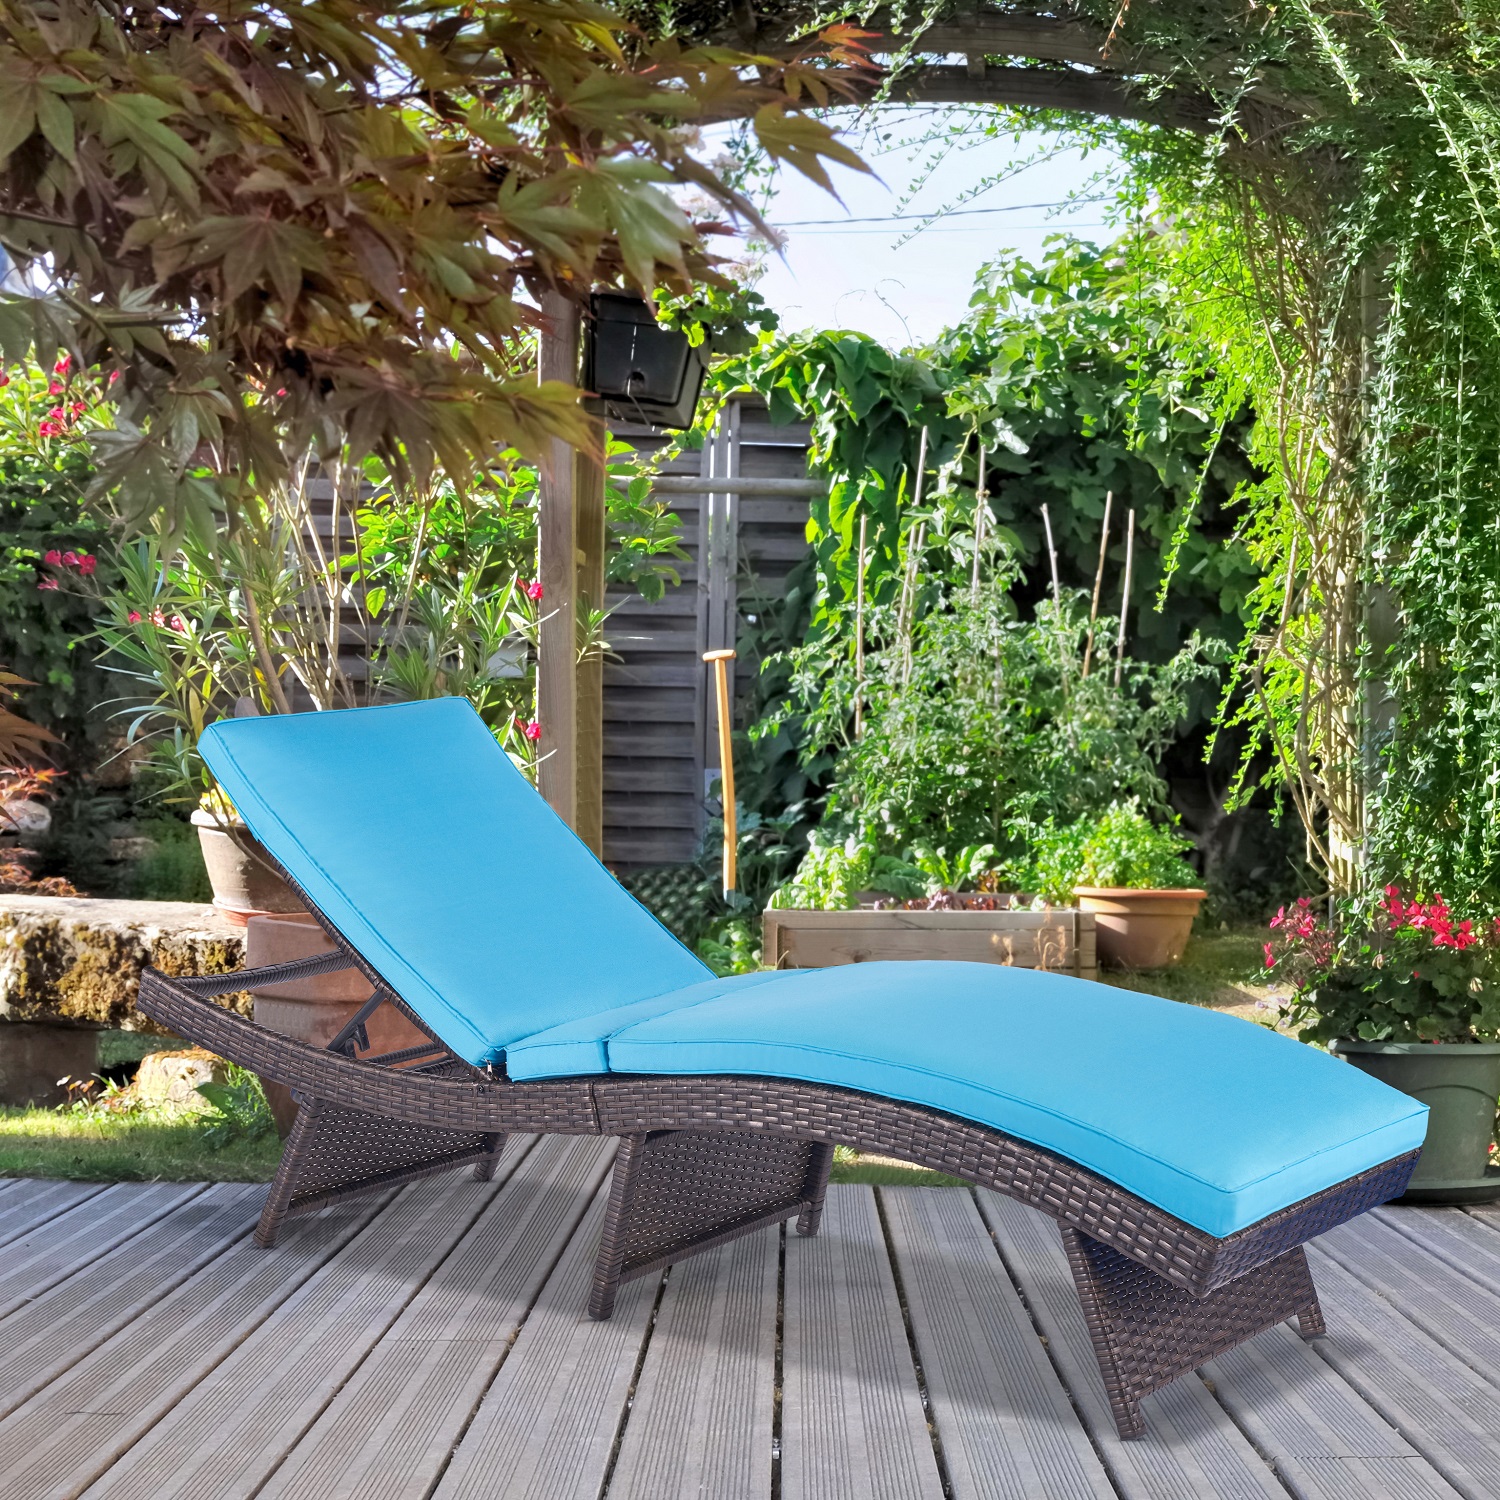 Folding Patio Wicker Chaise Lounge Chairs for Outside Set of 2 Rattan Sunbathing Chaise Lounge Chair Outdoor Assembled Reclining Sunbed Cushion Blue S Type Adjustable Backrest, No Assembly Required - image 2 of 7